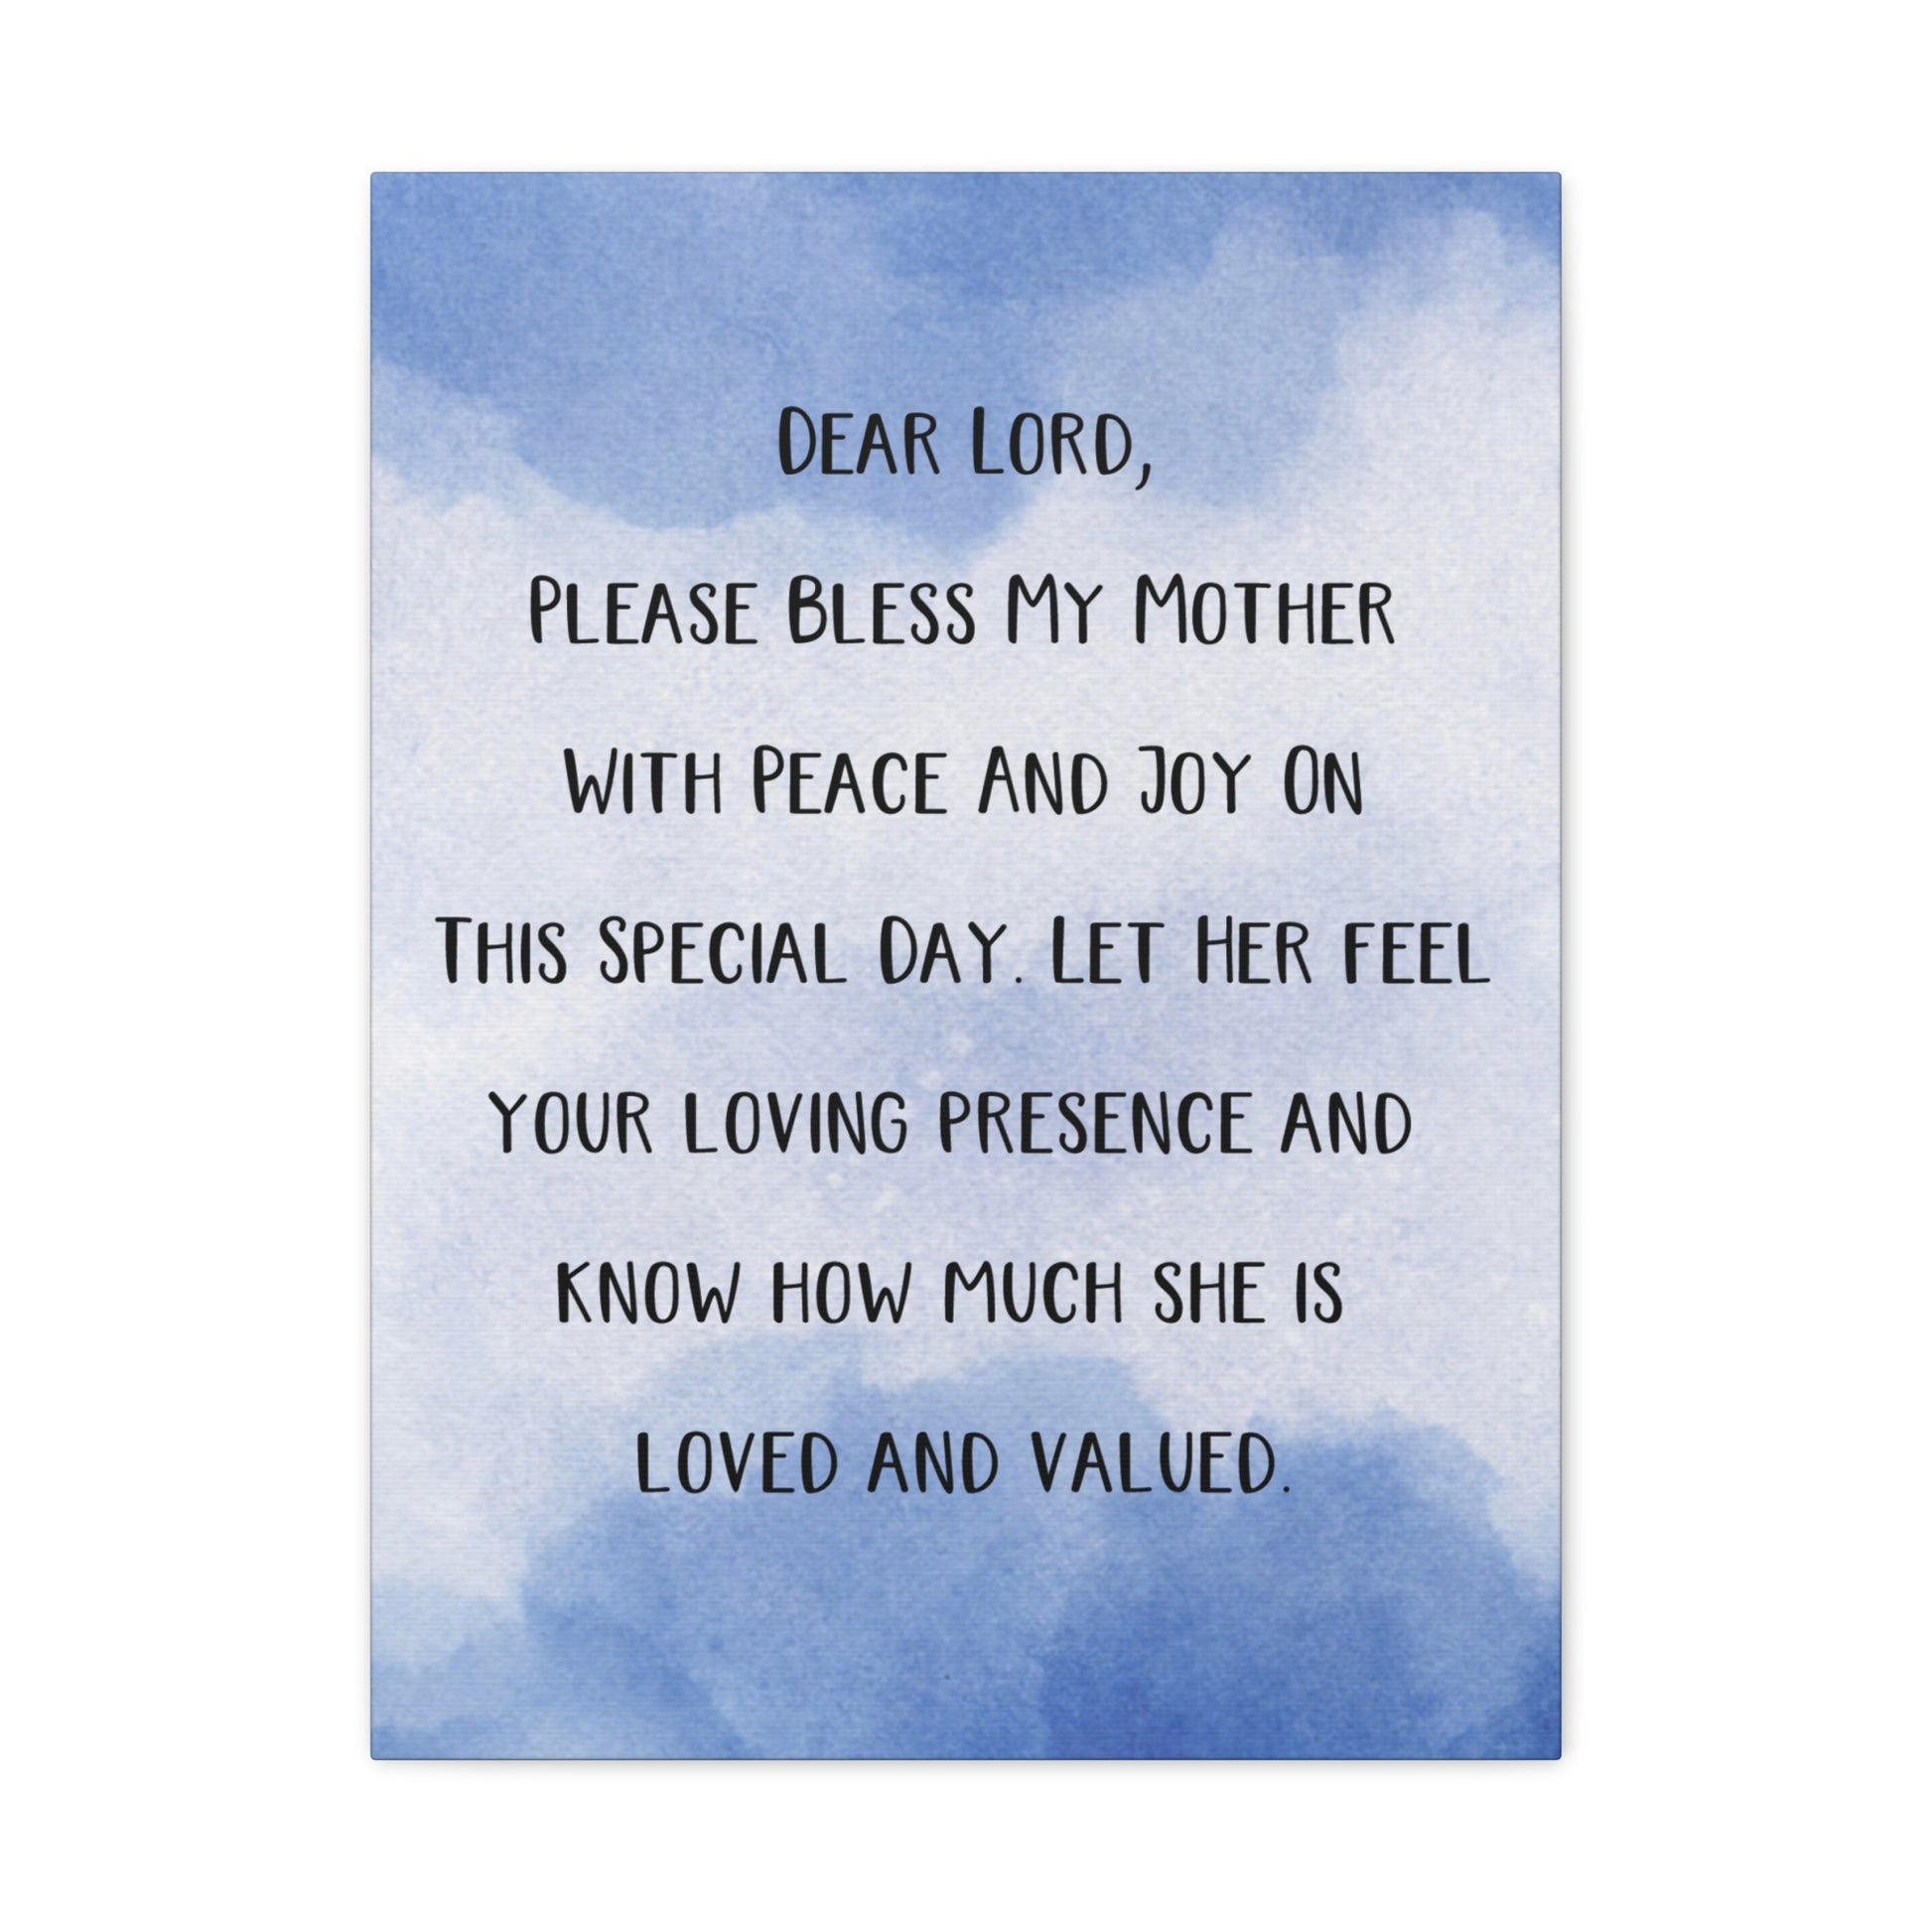 "Dear Lord, Bless My Mother" Wall Art - Weave Got Gifts - Unique Gifts You Won’t Find Anywhere Else!